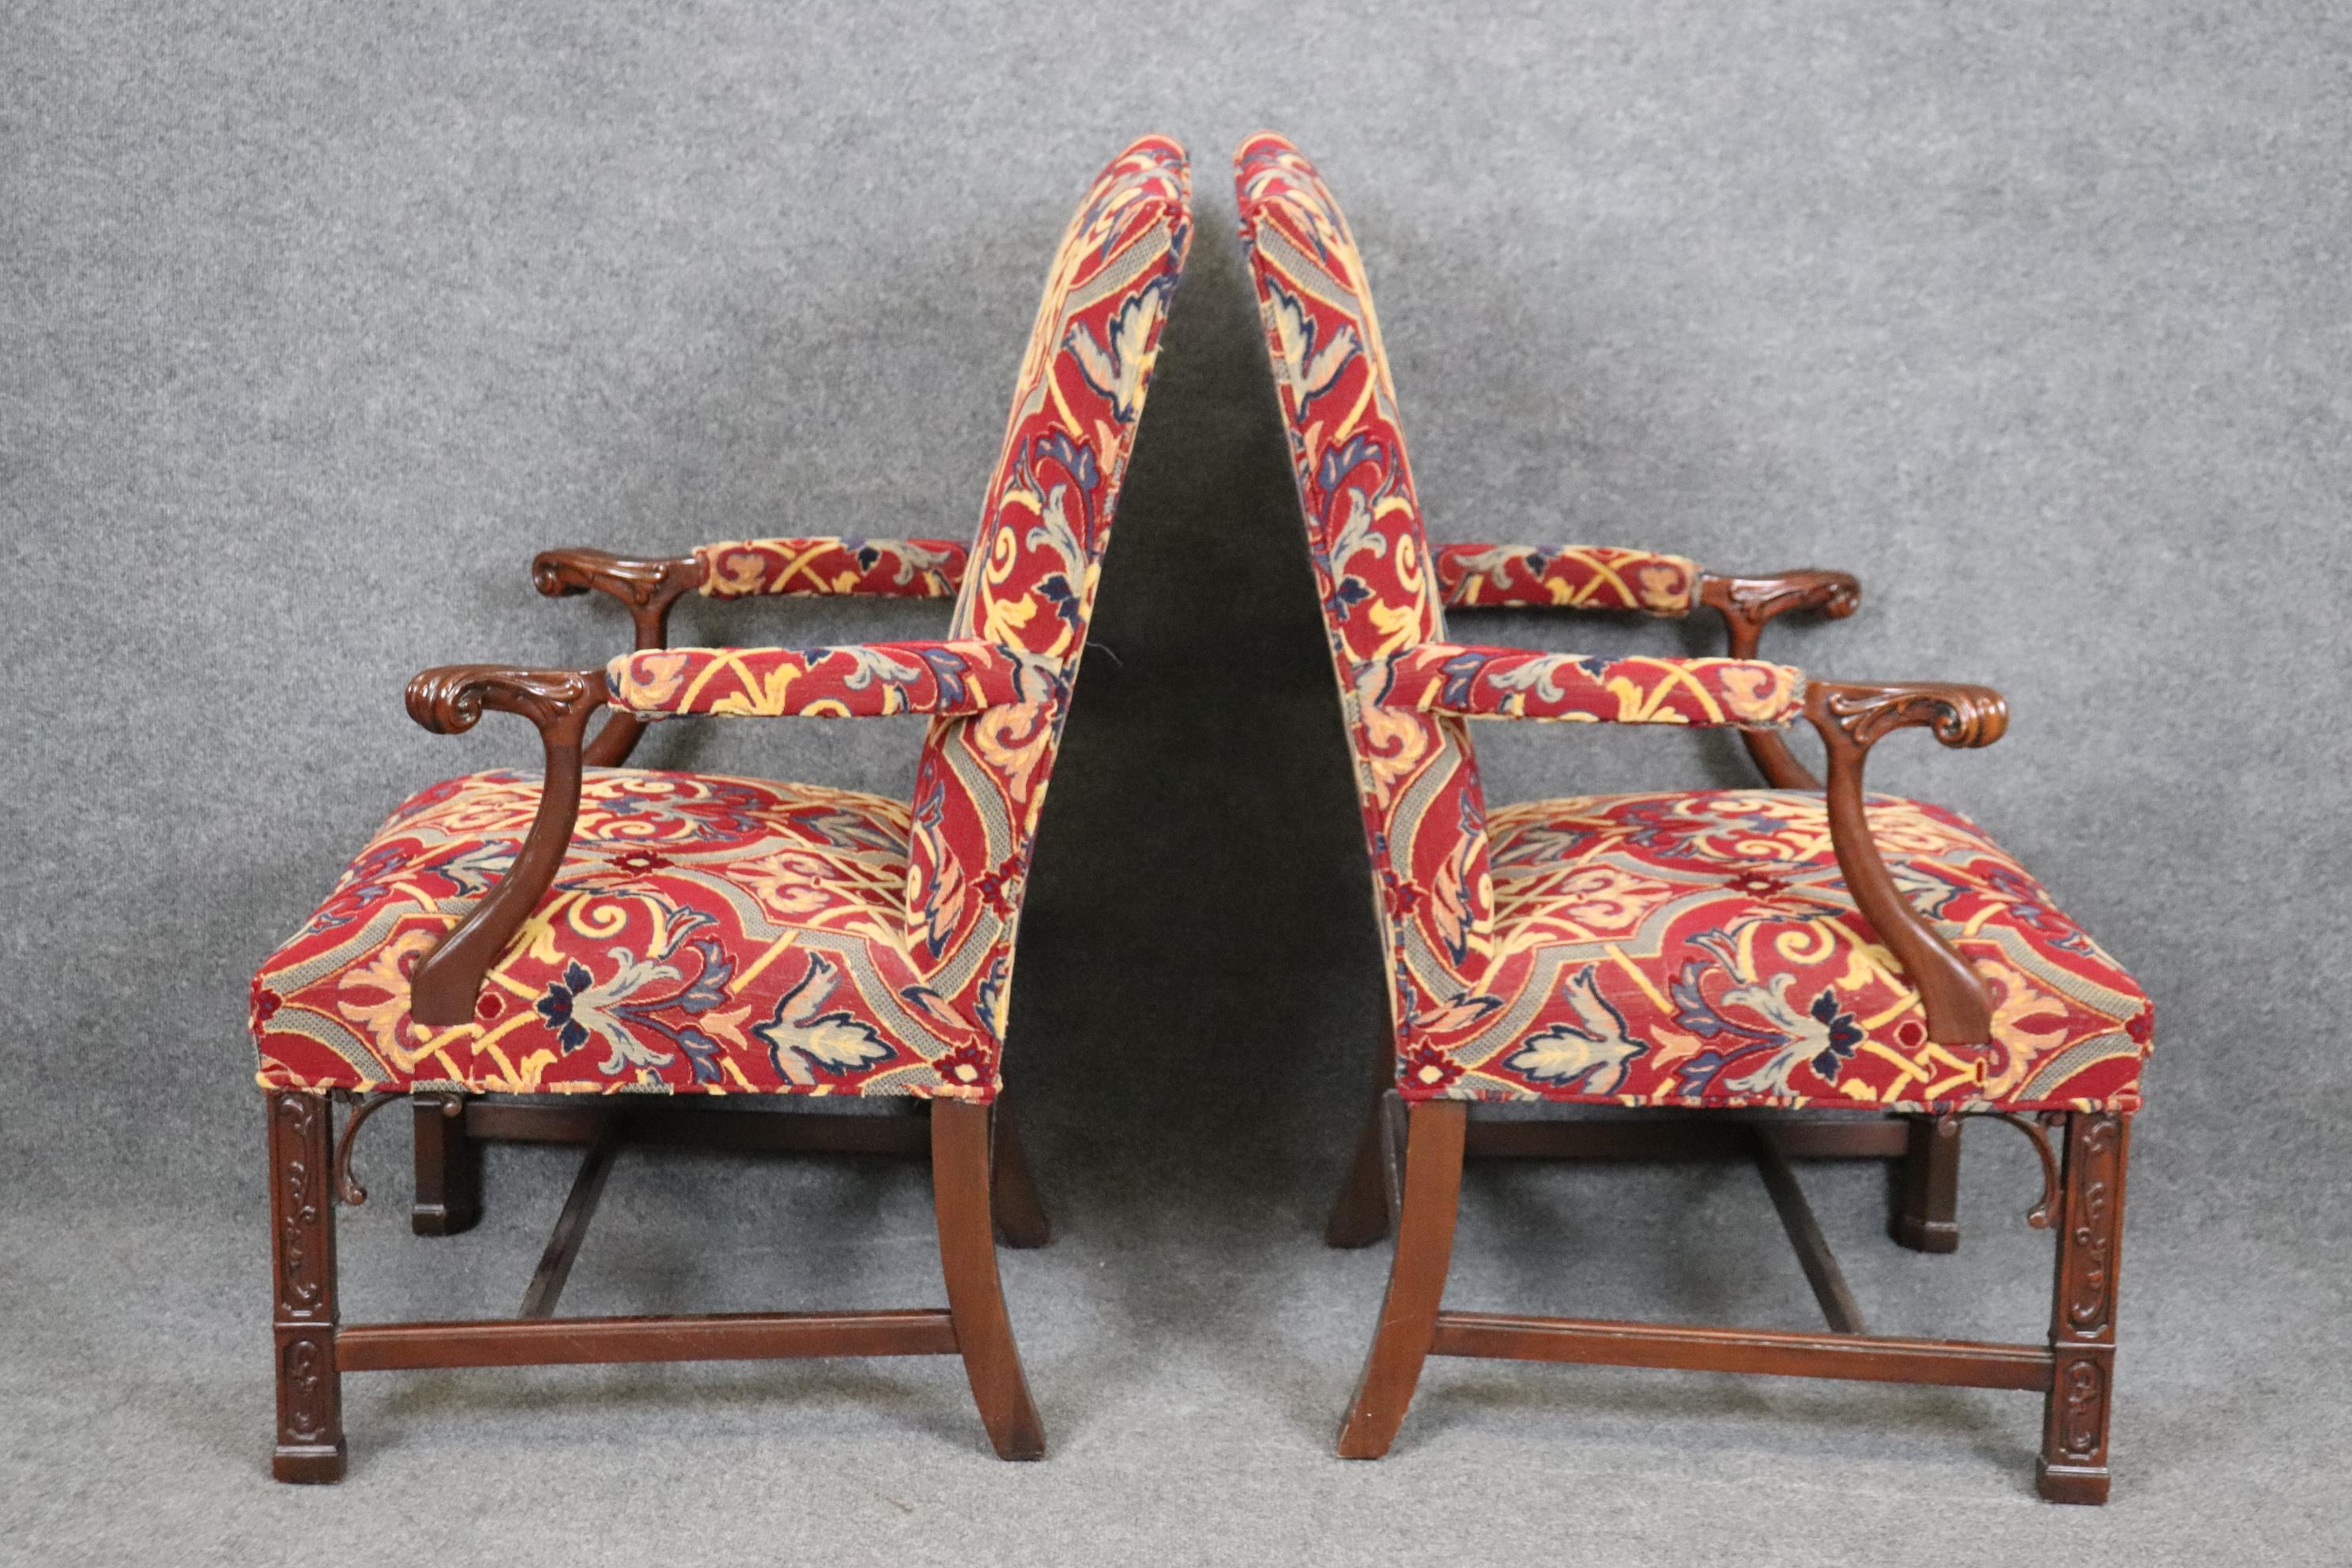 Pair of Solid Mahogany Blind Fretwork Chinese Chippendale Armchairs By Southwood In Good Condition For Sale In Swedesboro, NJ